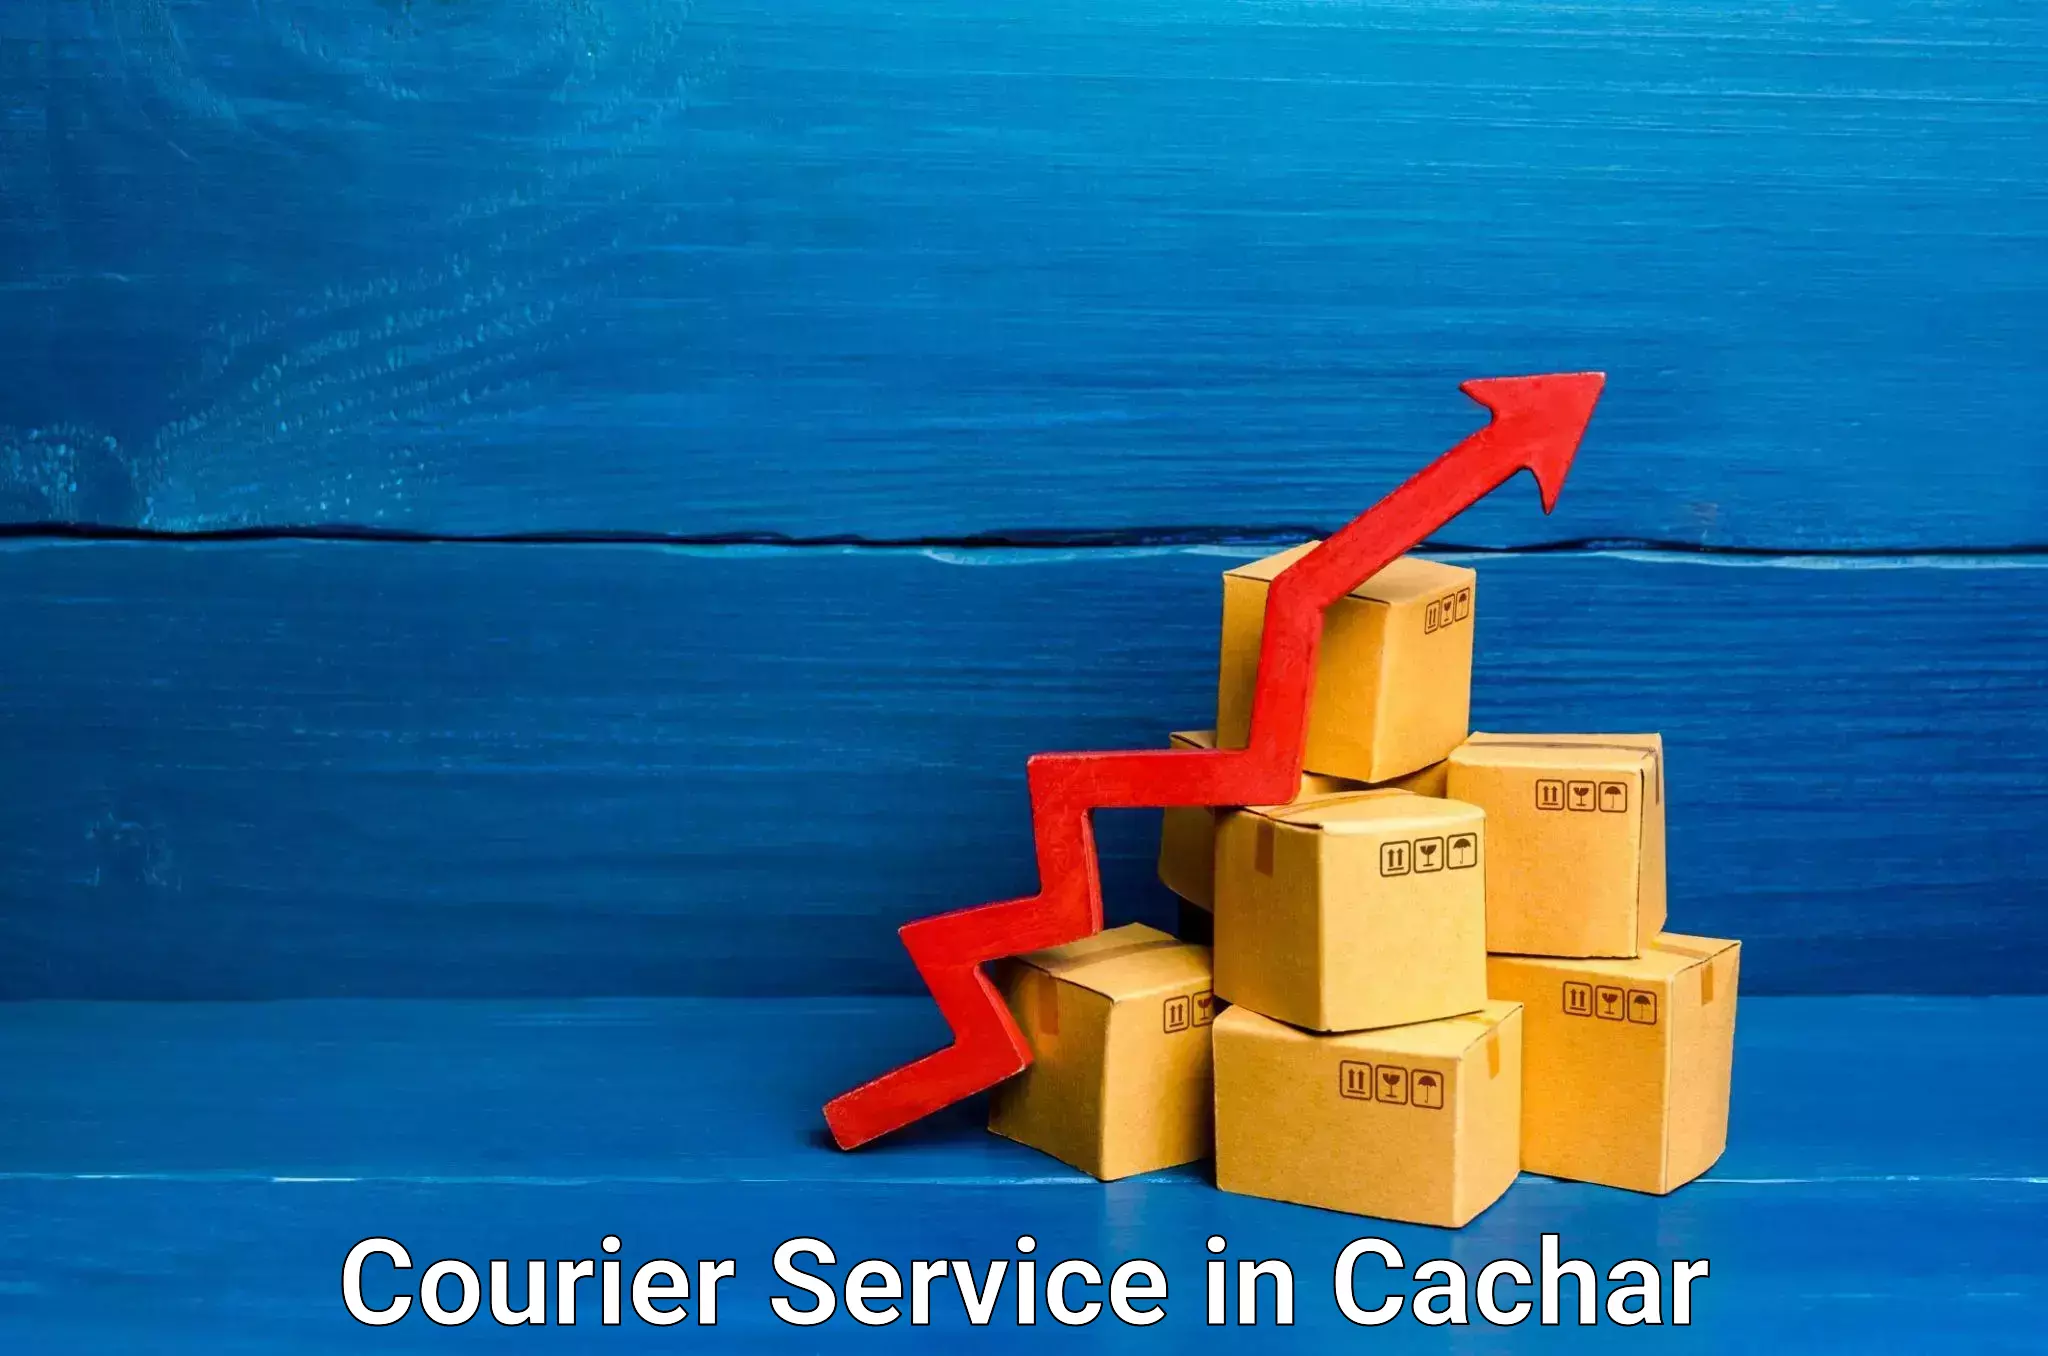 Efficient order fulfillment in Cachar